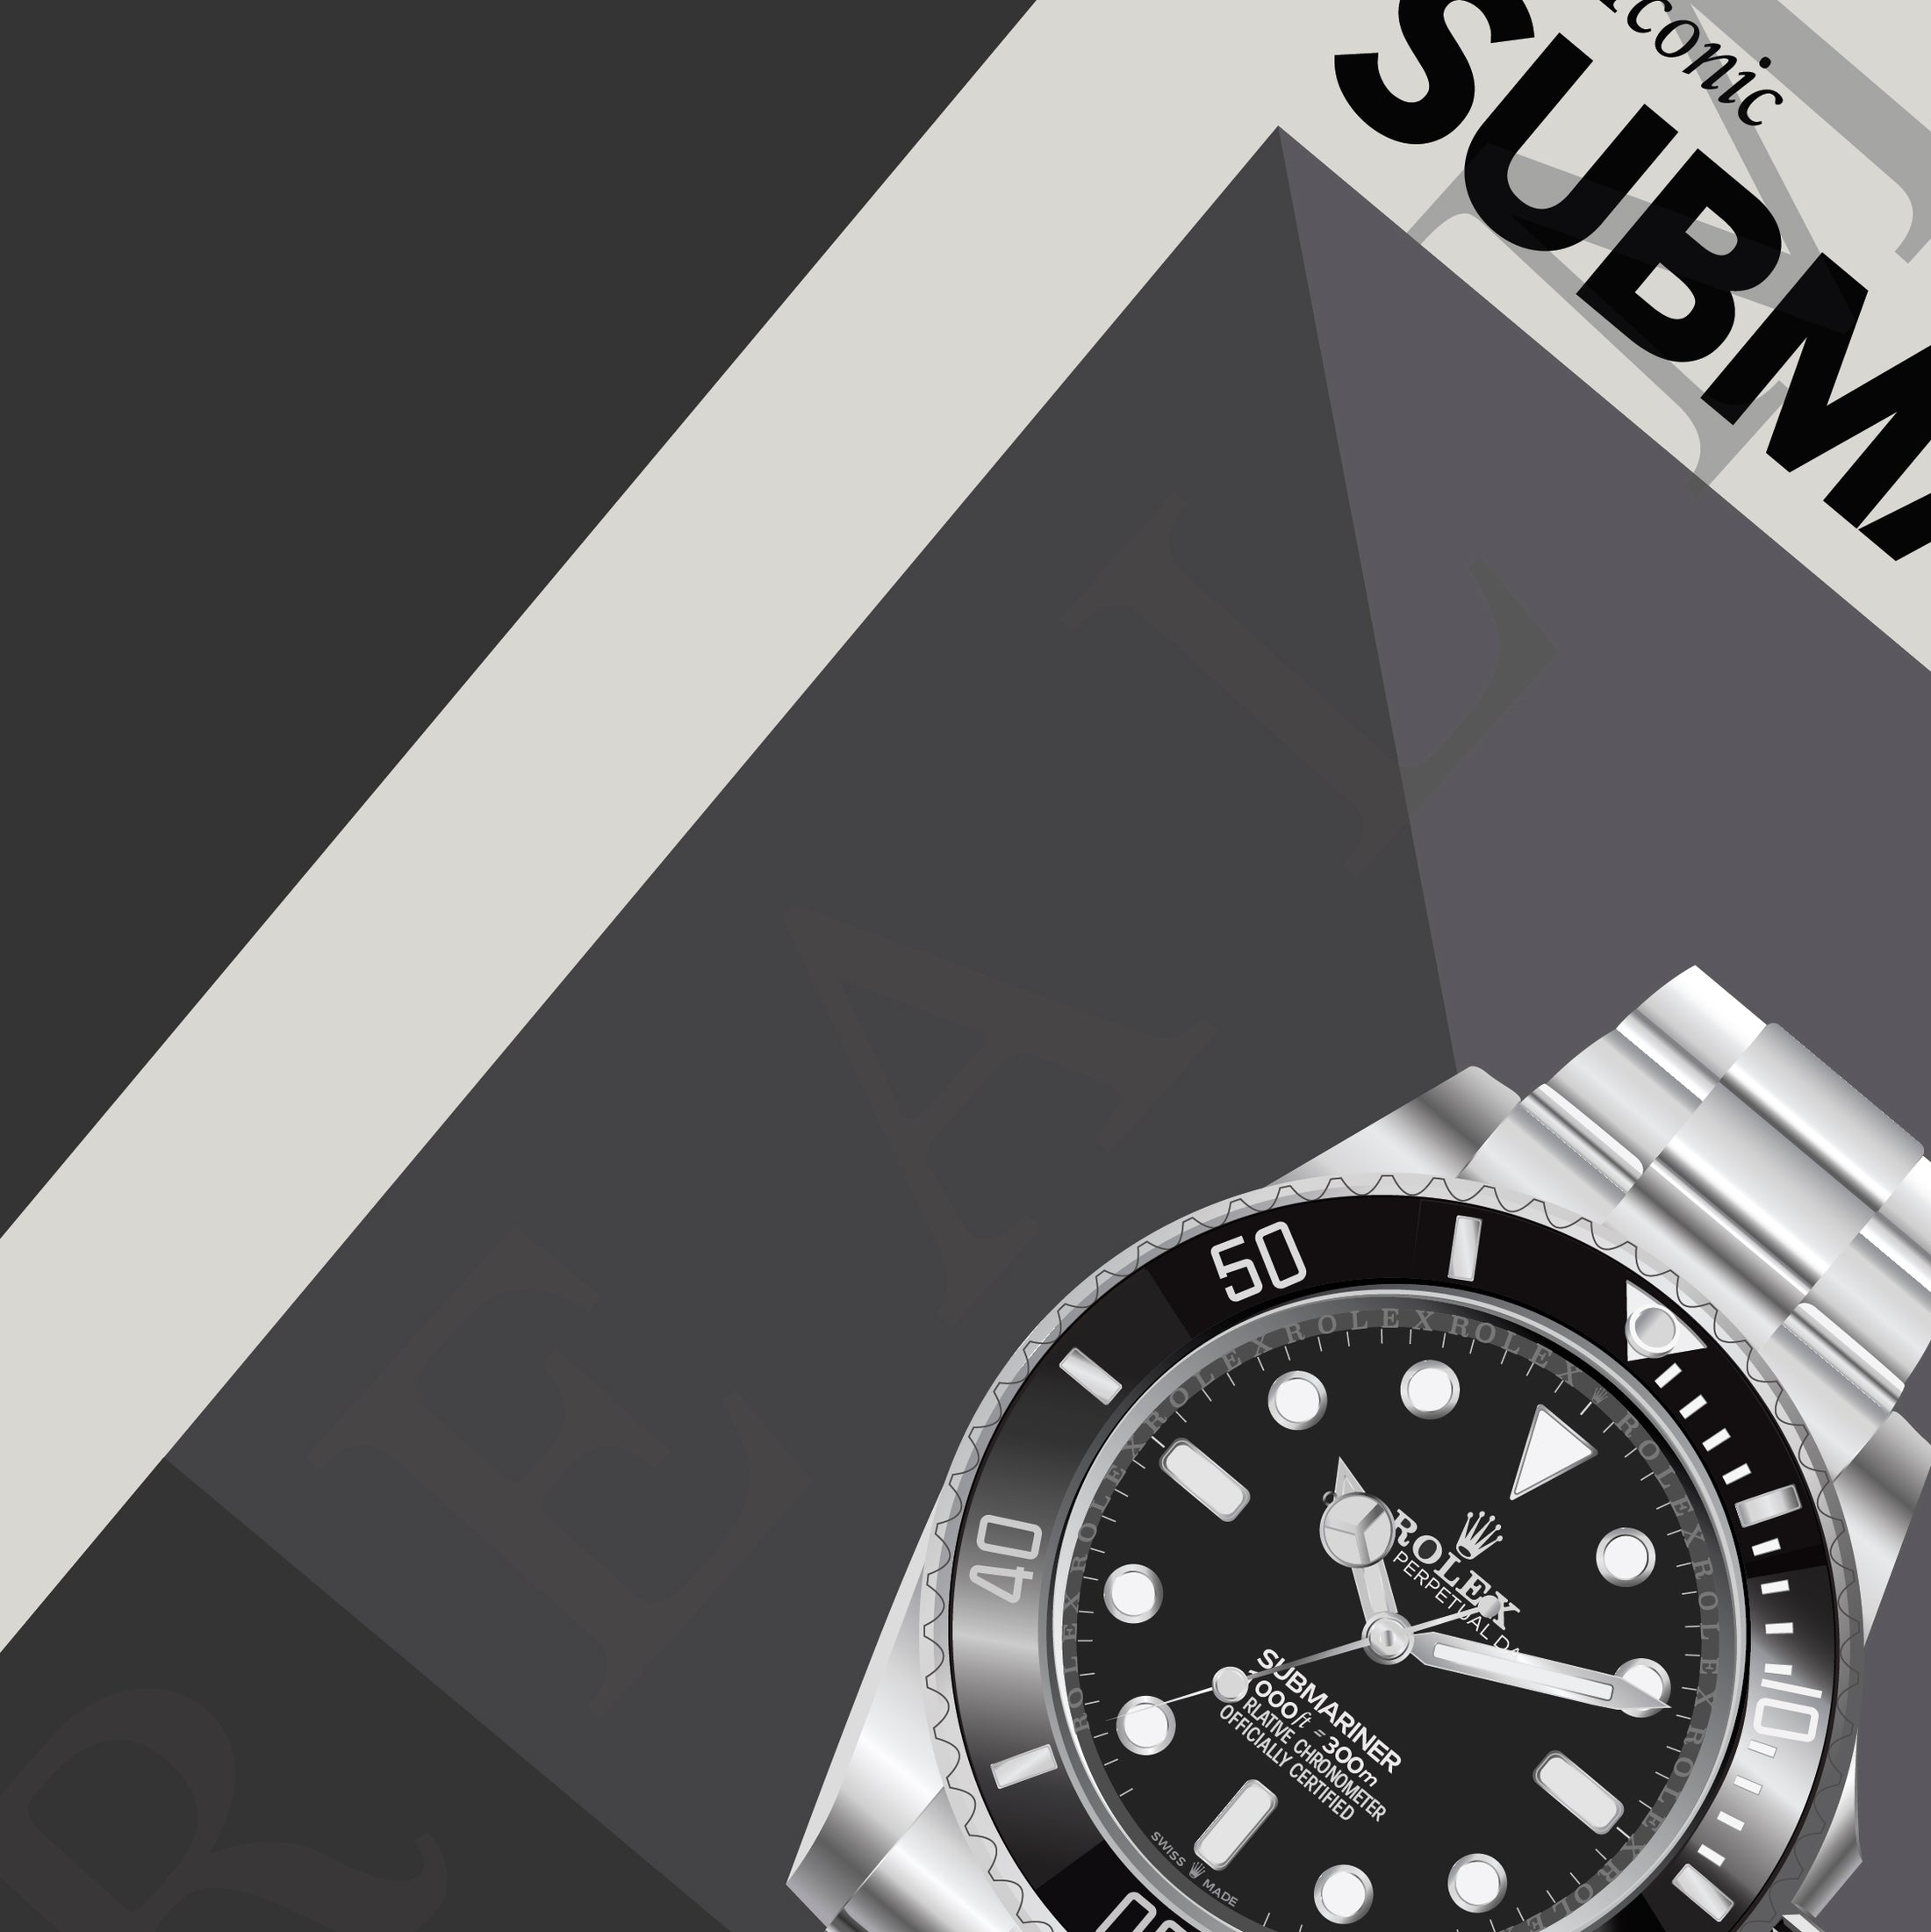 'The Iconic' Watch Print Series - Rolex Submariner, No-Date